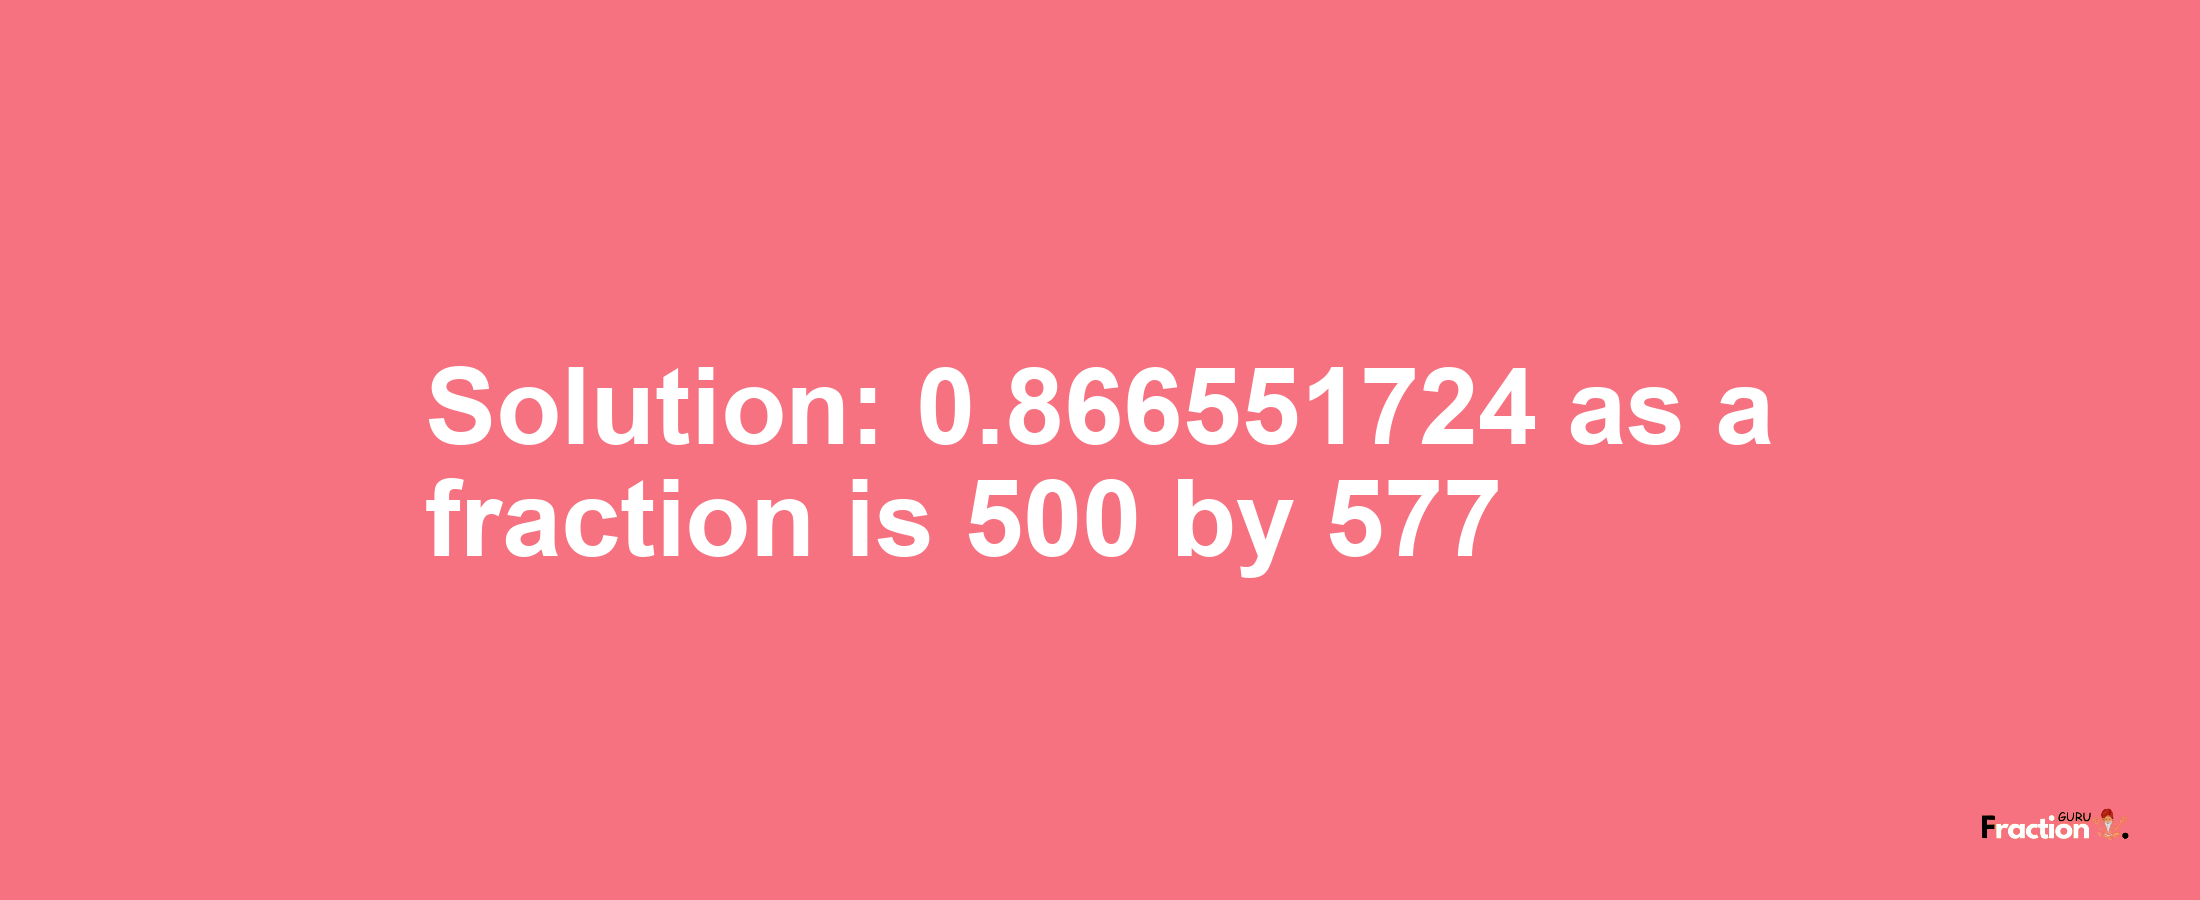 Solution:0.866551724 as a fraction is 500/577